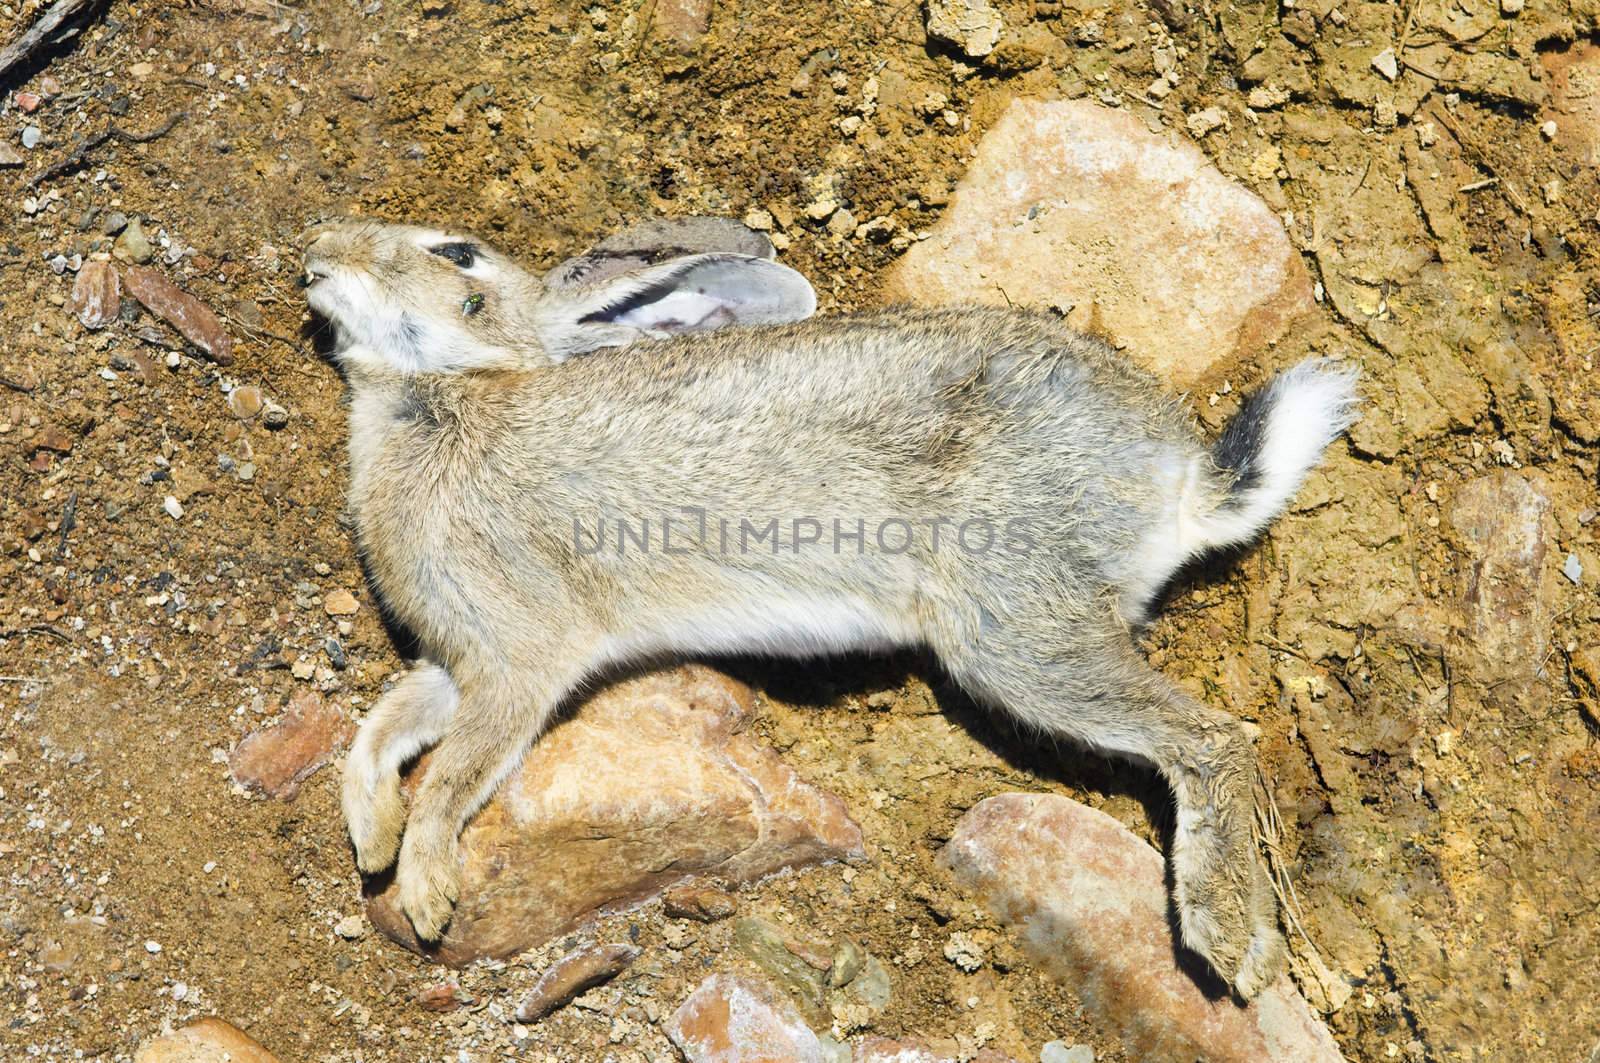 Dead rabbit laying down killed by some disease